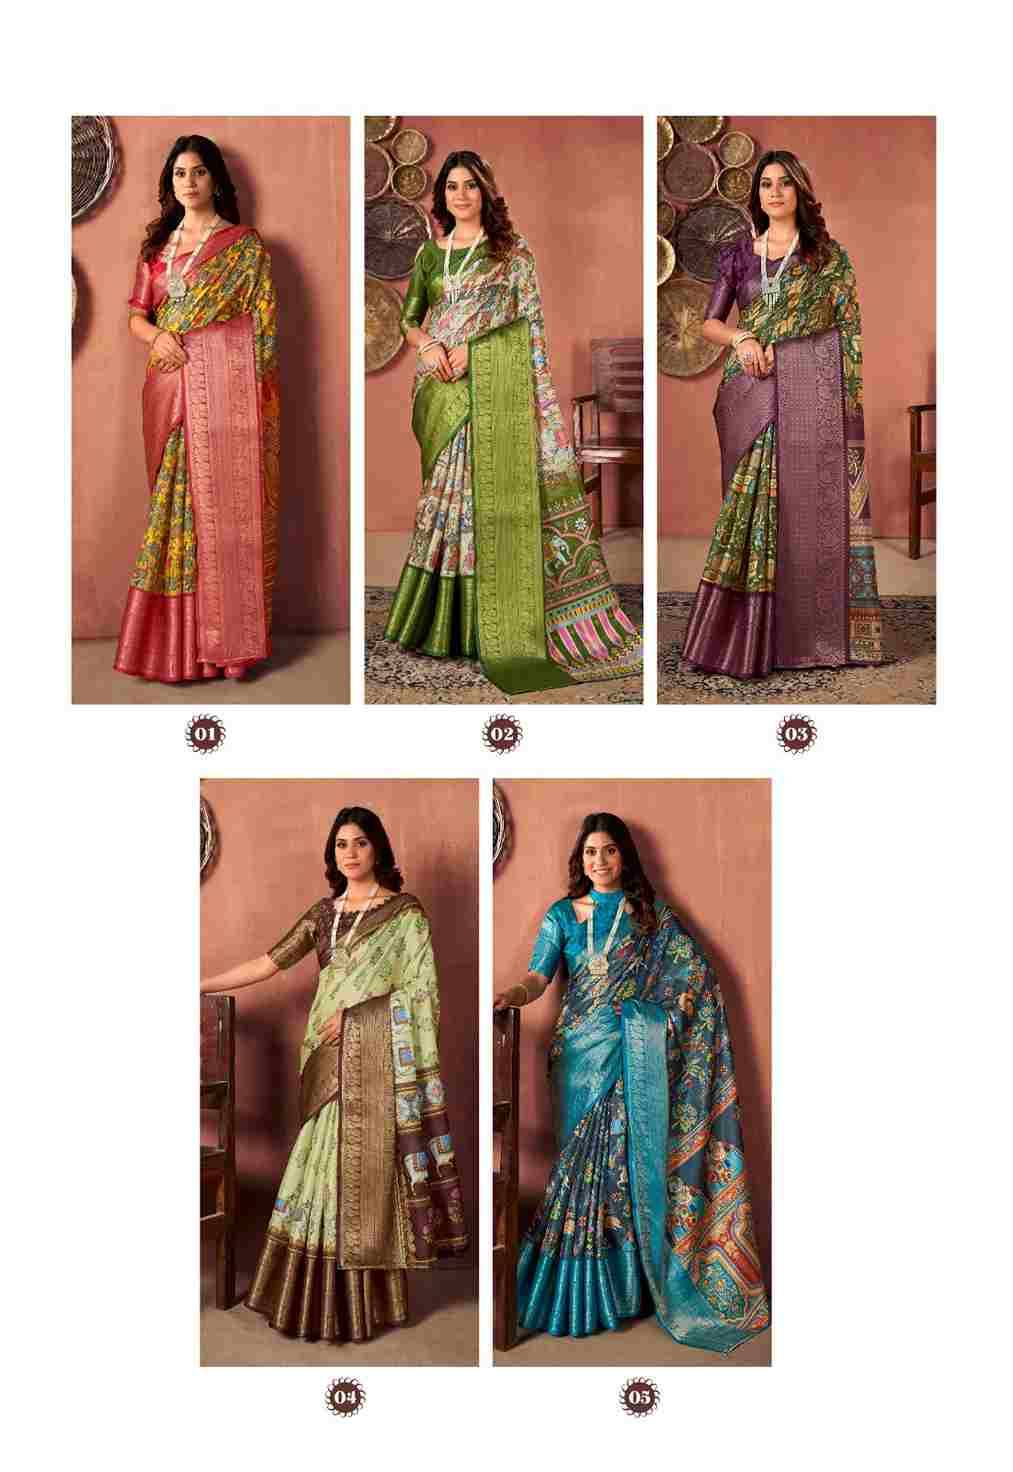 Riwaa By Sr 01 To 10 Series Indian Traditional Wear Collection Beautiful Stylish Fancy Colorful Party Wear & Occasional Wear Kota Checks Sarees At Wholesale Price